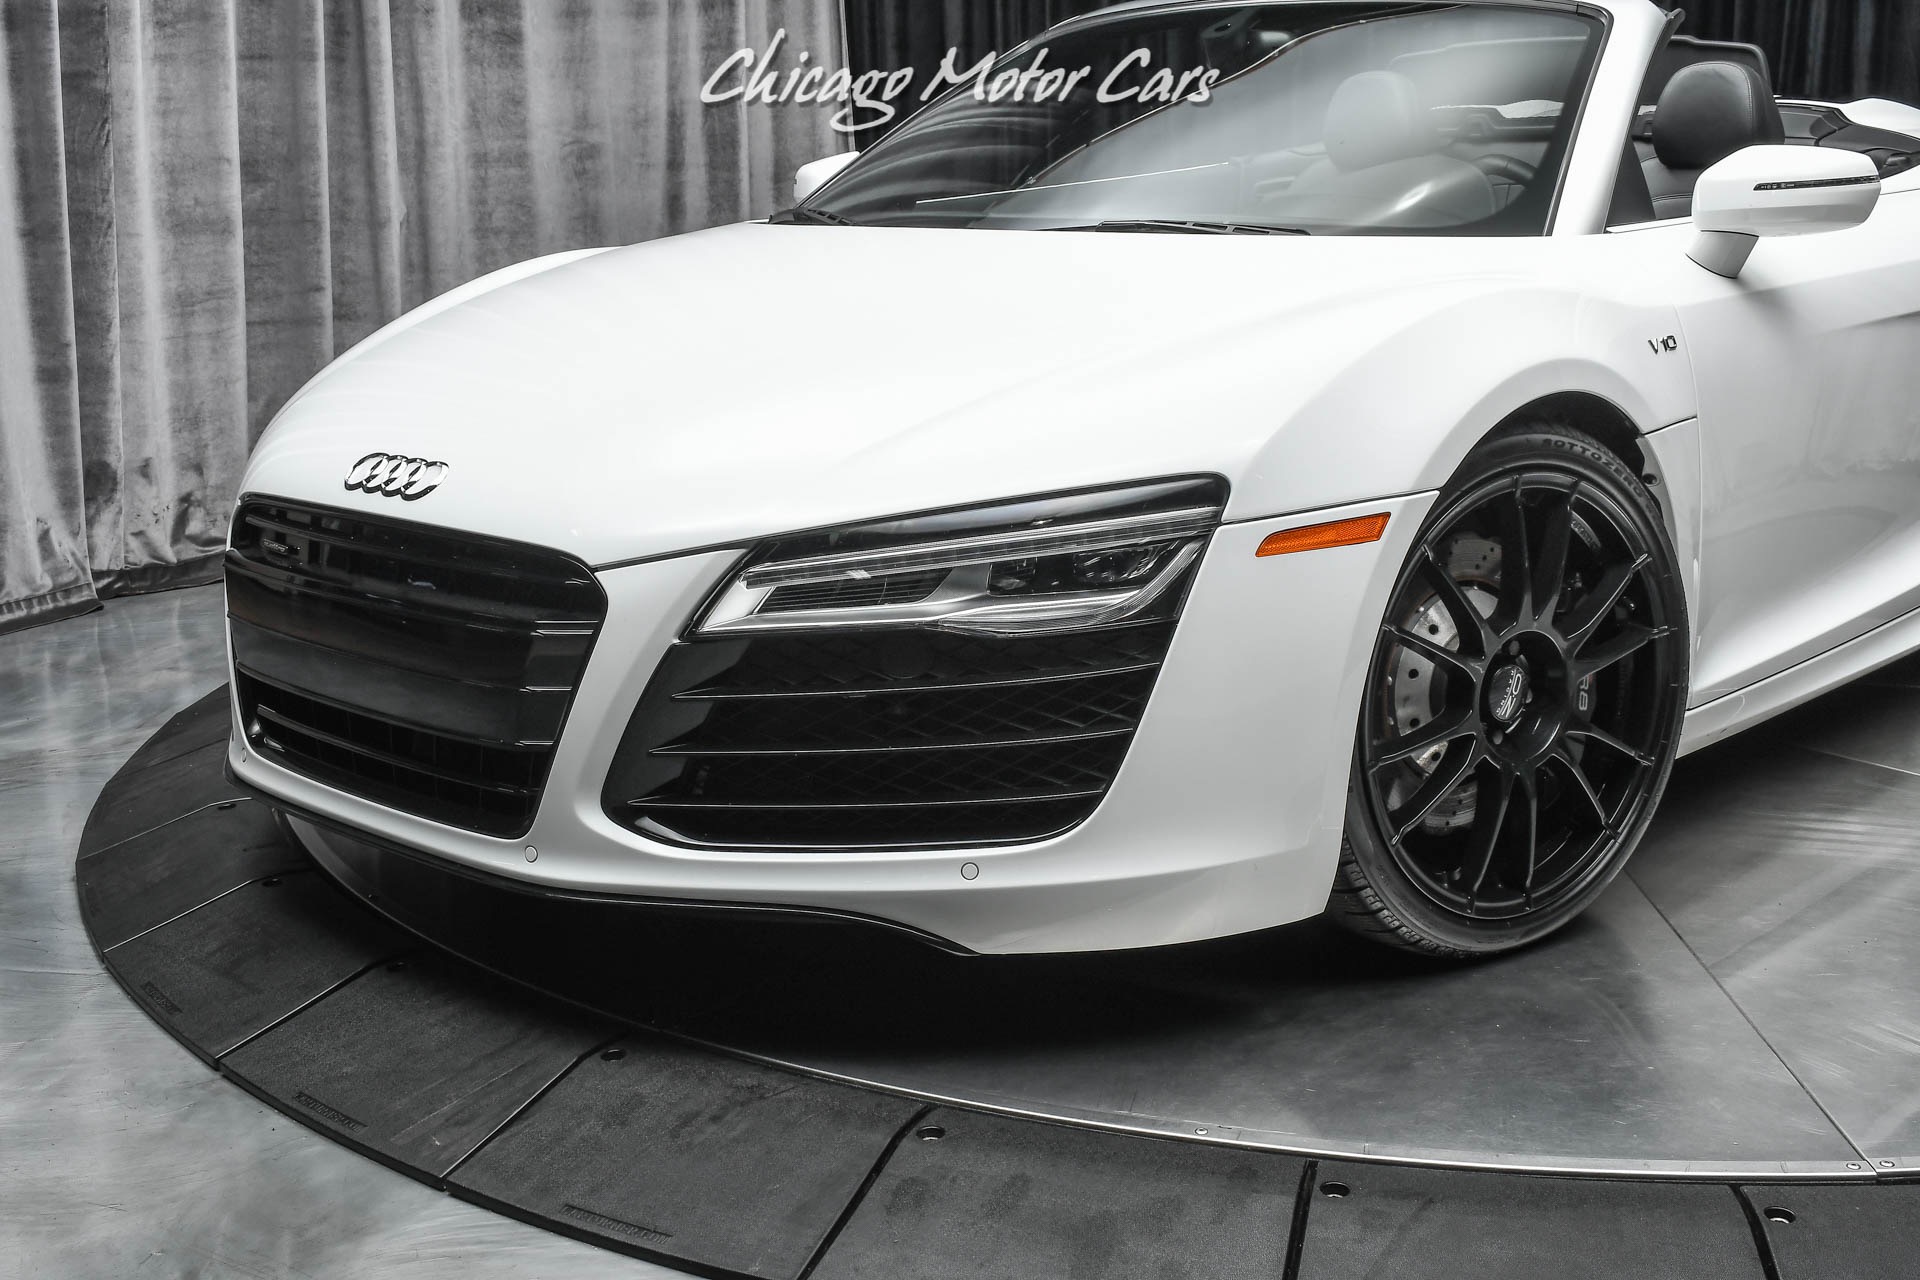 Used-2014-Audi-R8-52-V10-Quattro-Spyder-LOW-Miles-FULL-Leather-Pkg-Carbon-Inlays-LOADED